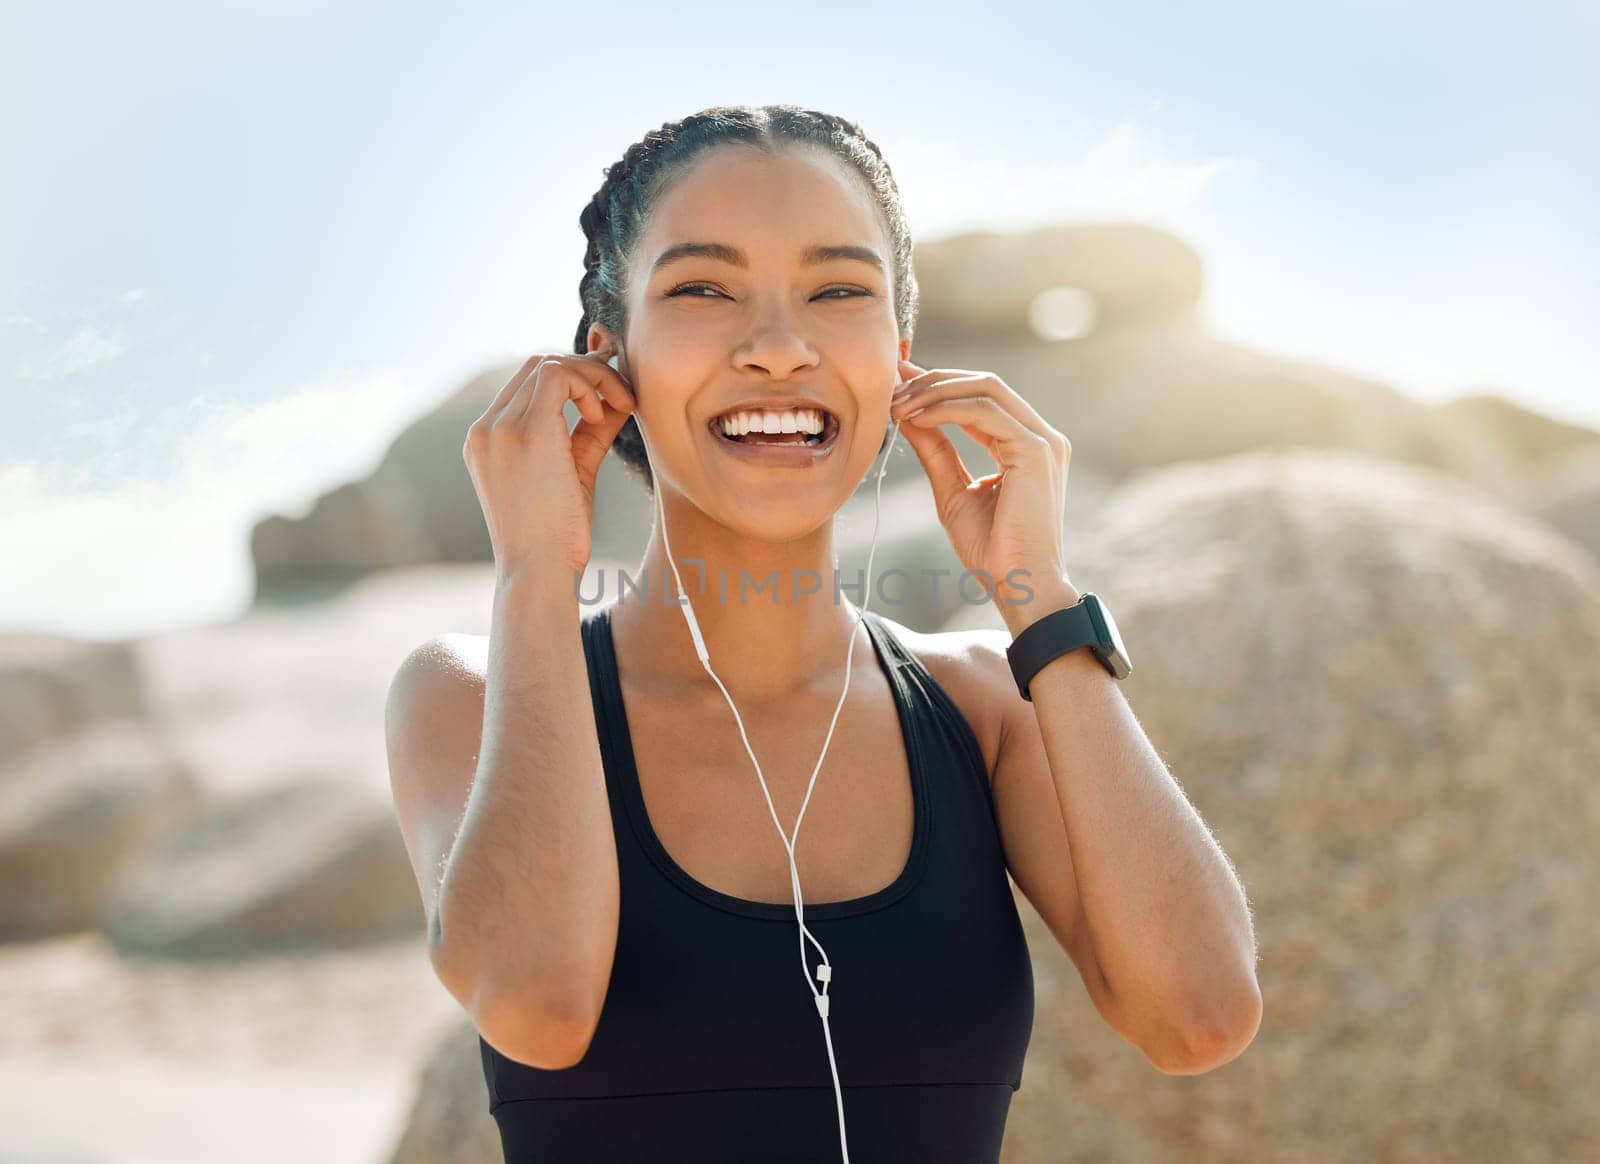 Happy woman with earphones, fitness at the beach and listening to music for motivation and workout outdoor. Exercise, health and smile, female athlete streaming online with radio and audio in nature.